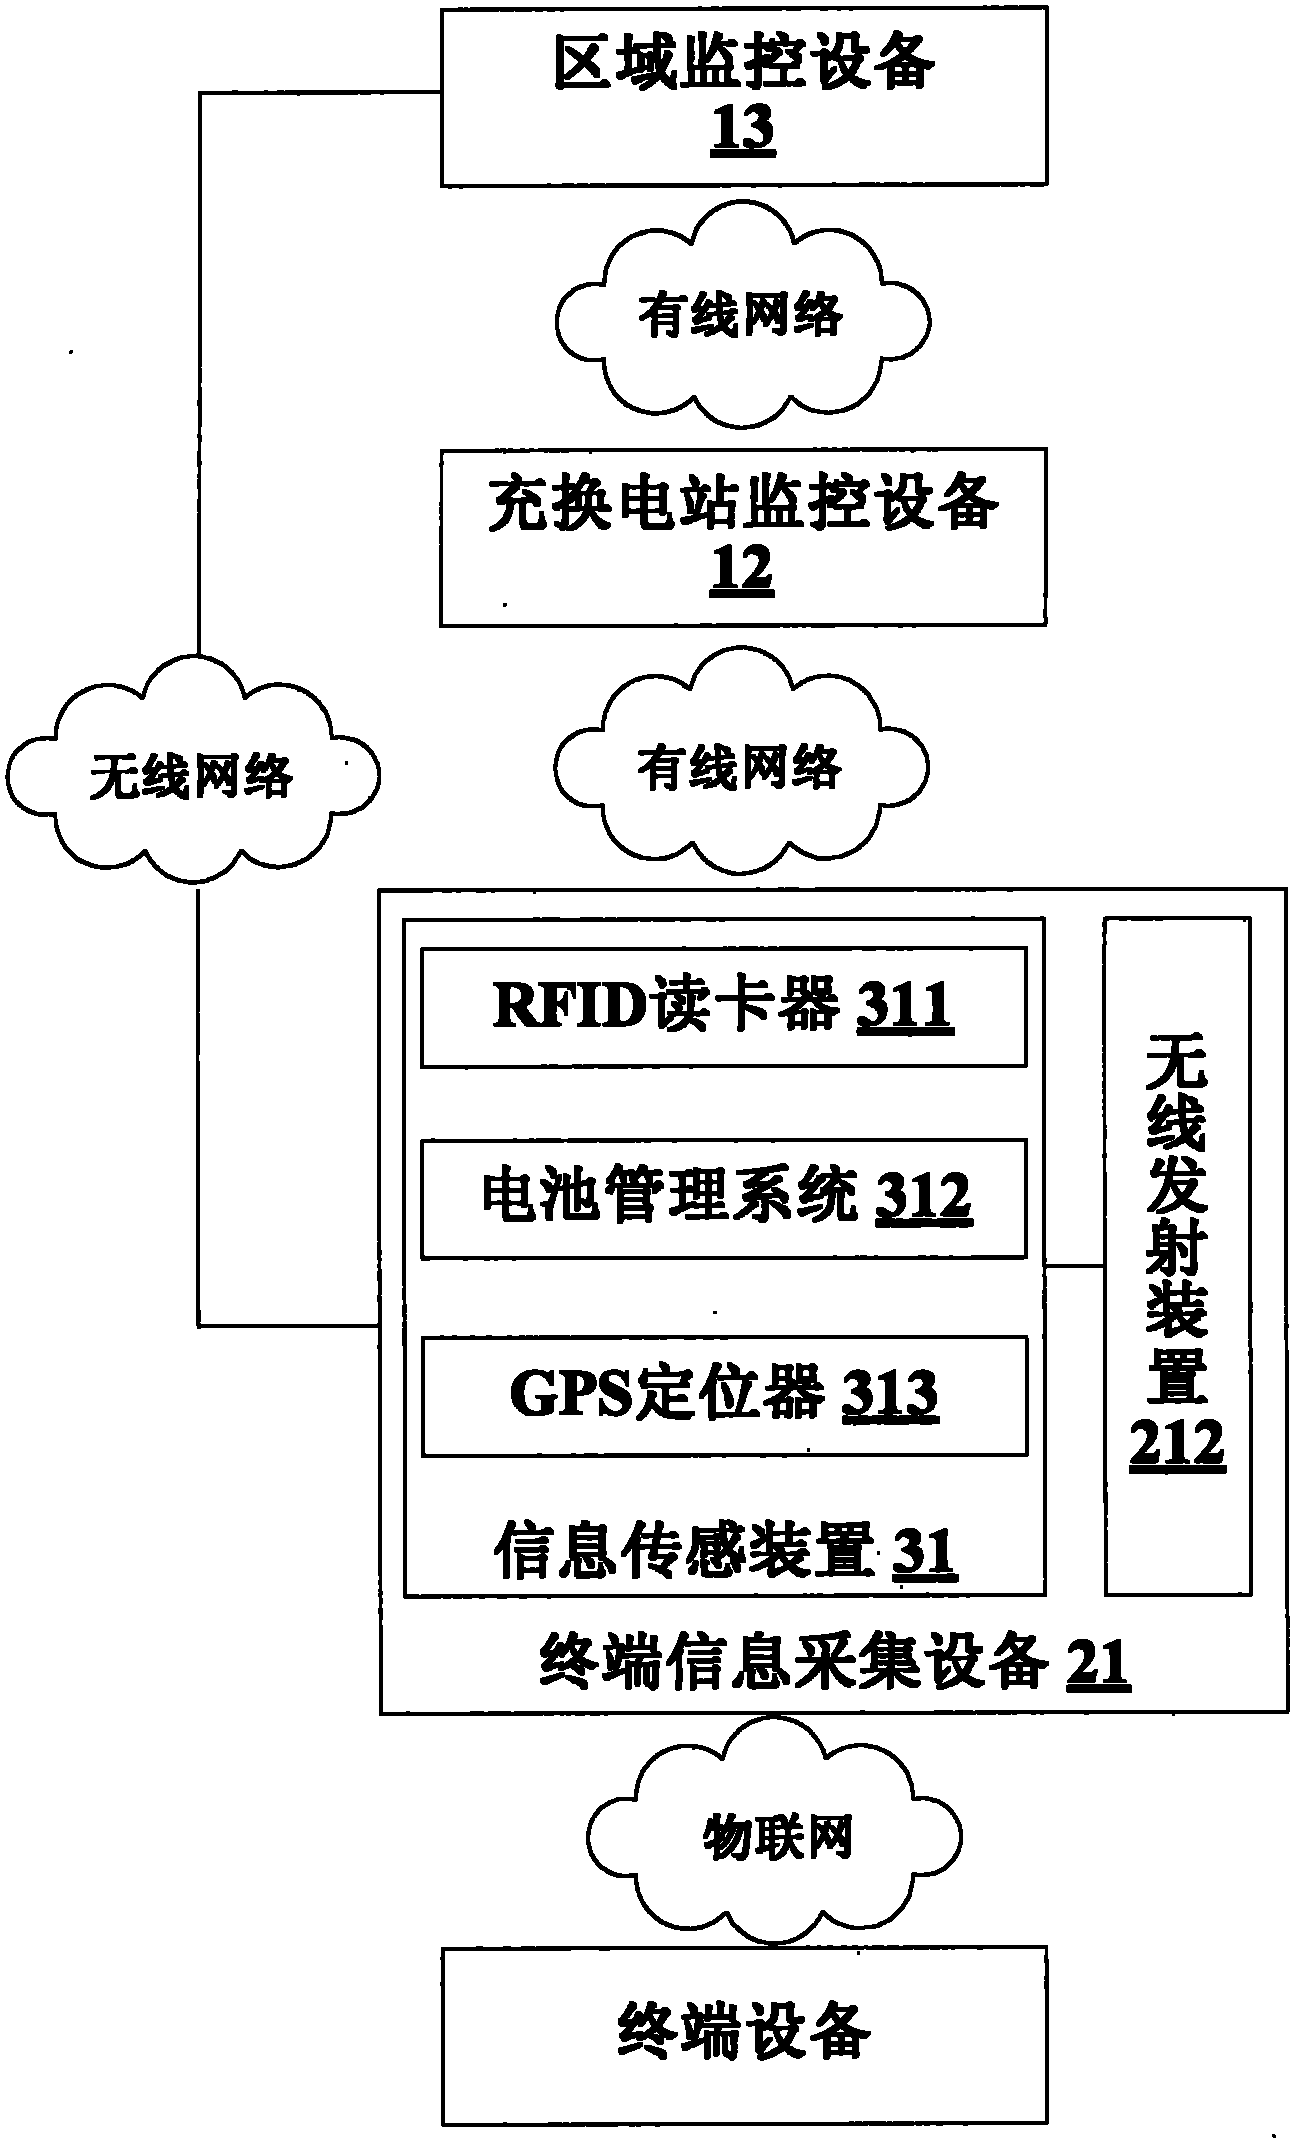 Charging and battery replacing monitoring system and method based on internet of things